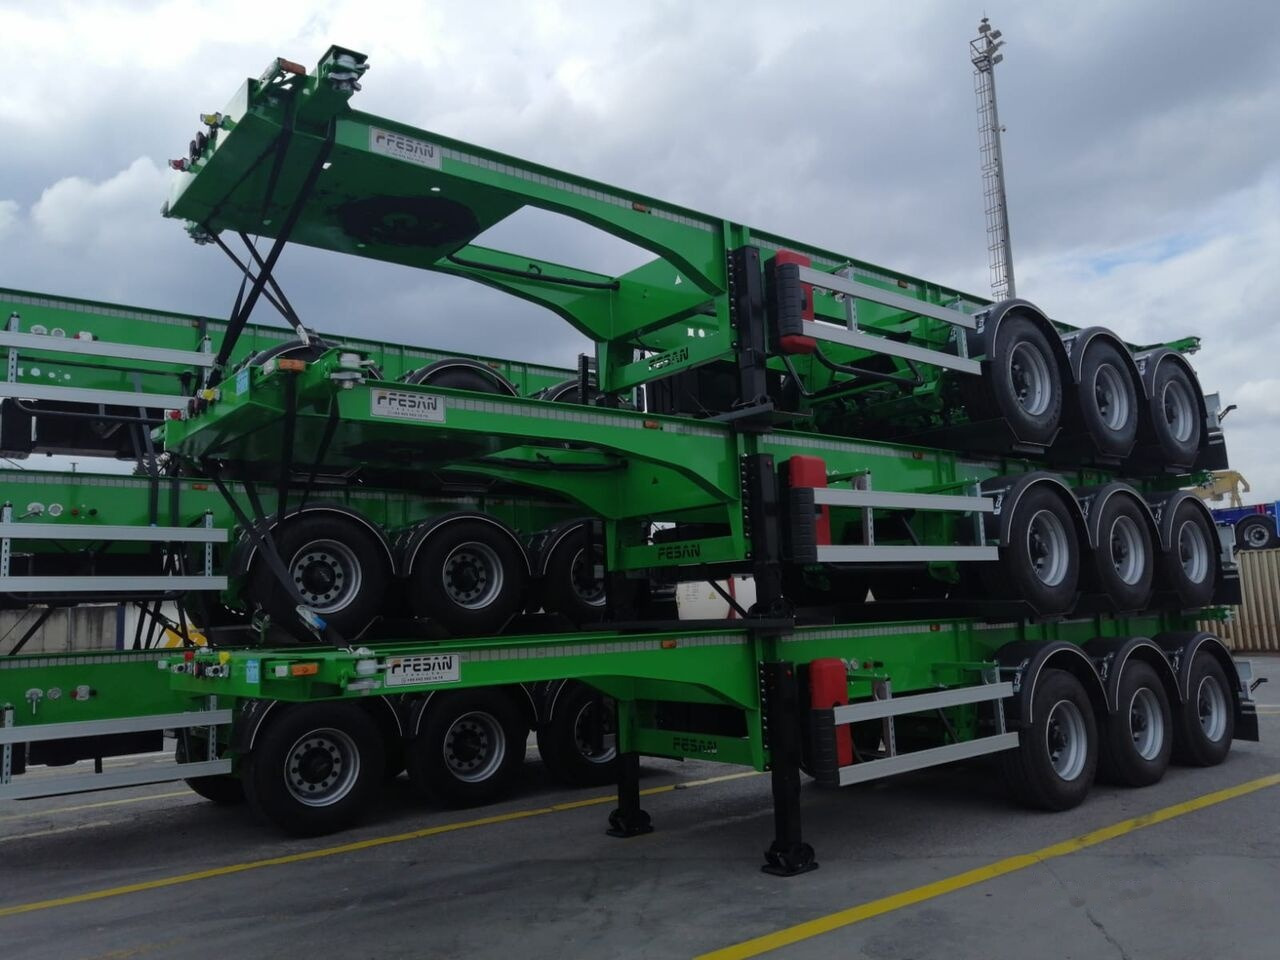 Fesan CONTAINER CARRIER CHASSIS 20 FEET, 30 FEET, 40 FEET, 40 FEET HC в лизинг Fesan CONTAINER CARRIER CHASSIS 20 FEET, 30 FEET, 40 FEET, 40 FEET HC: фото 7